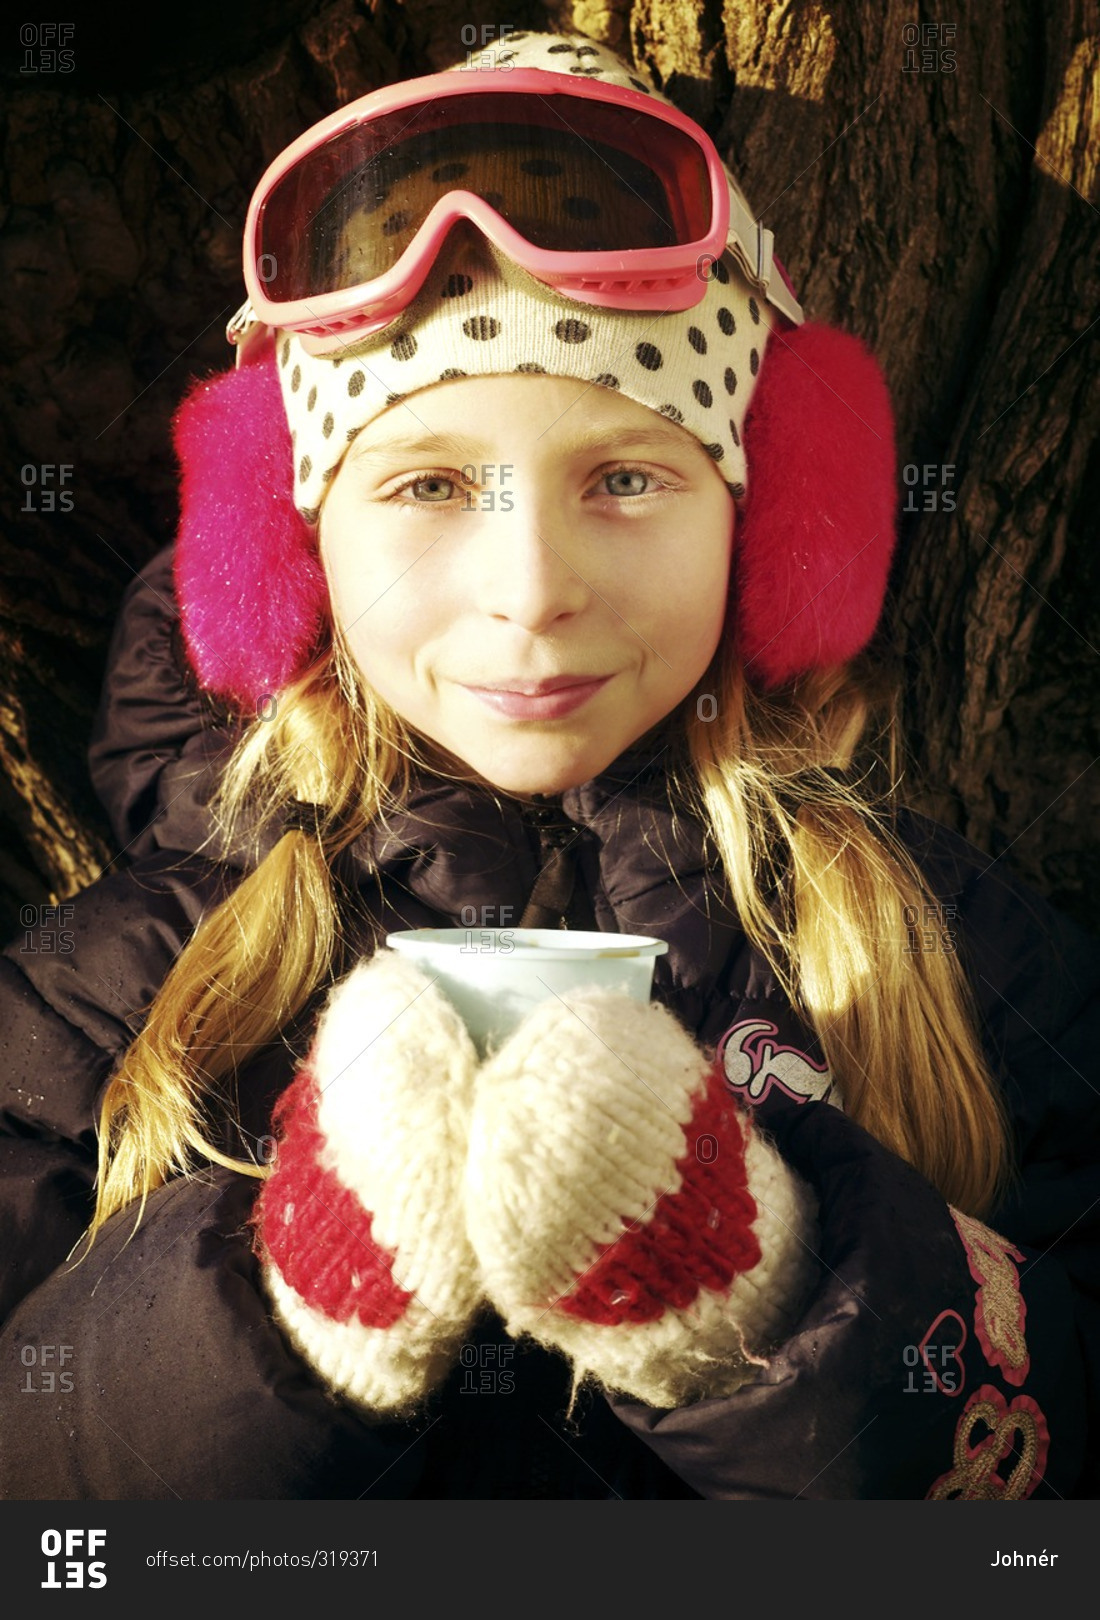 Portrait of girl wearing winter clothing holding cup